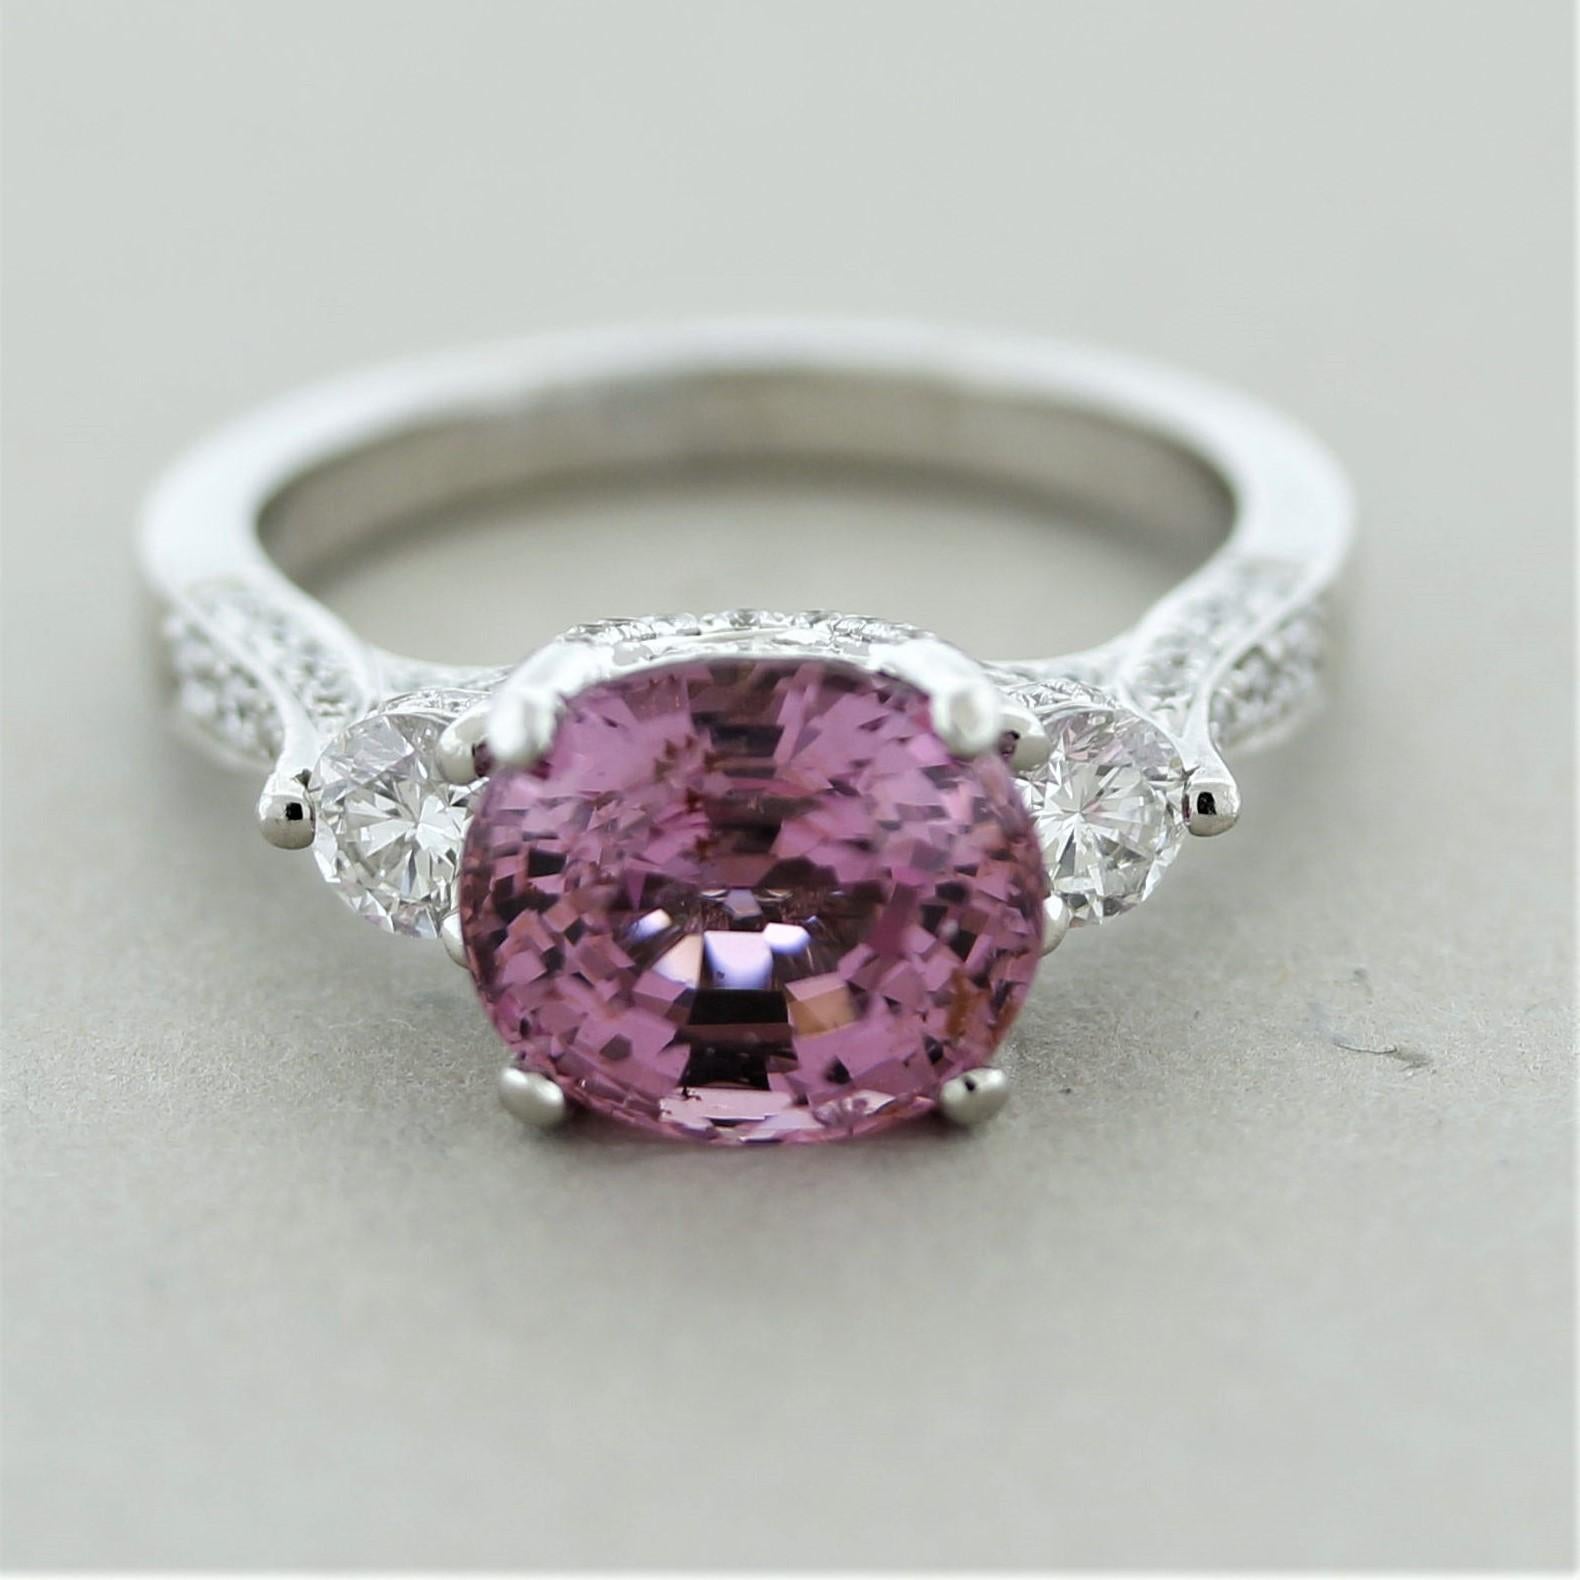 A sweet ring featuring a fine gem 3.86 carat spinel. It has a strongly saturated pink color with exceptional brilliance and dispersion seen in top spinel. It is accented by 2 larger round brilliant-cut diamonds set on its sides along with smaller